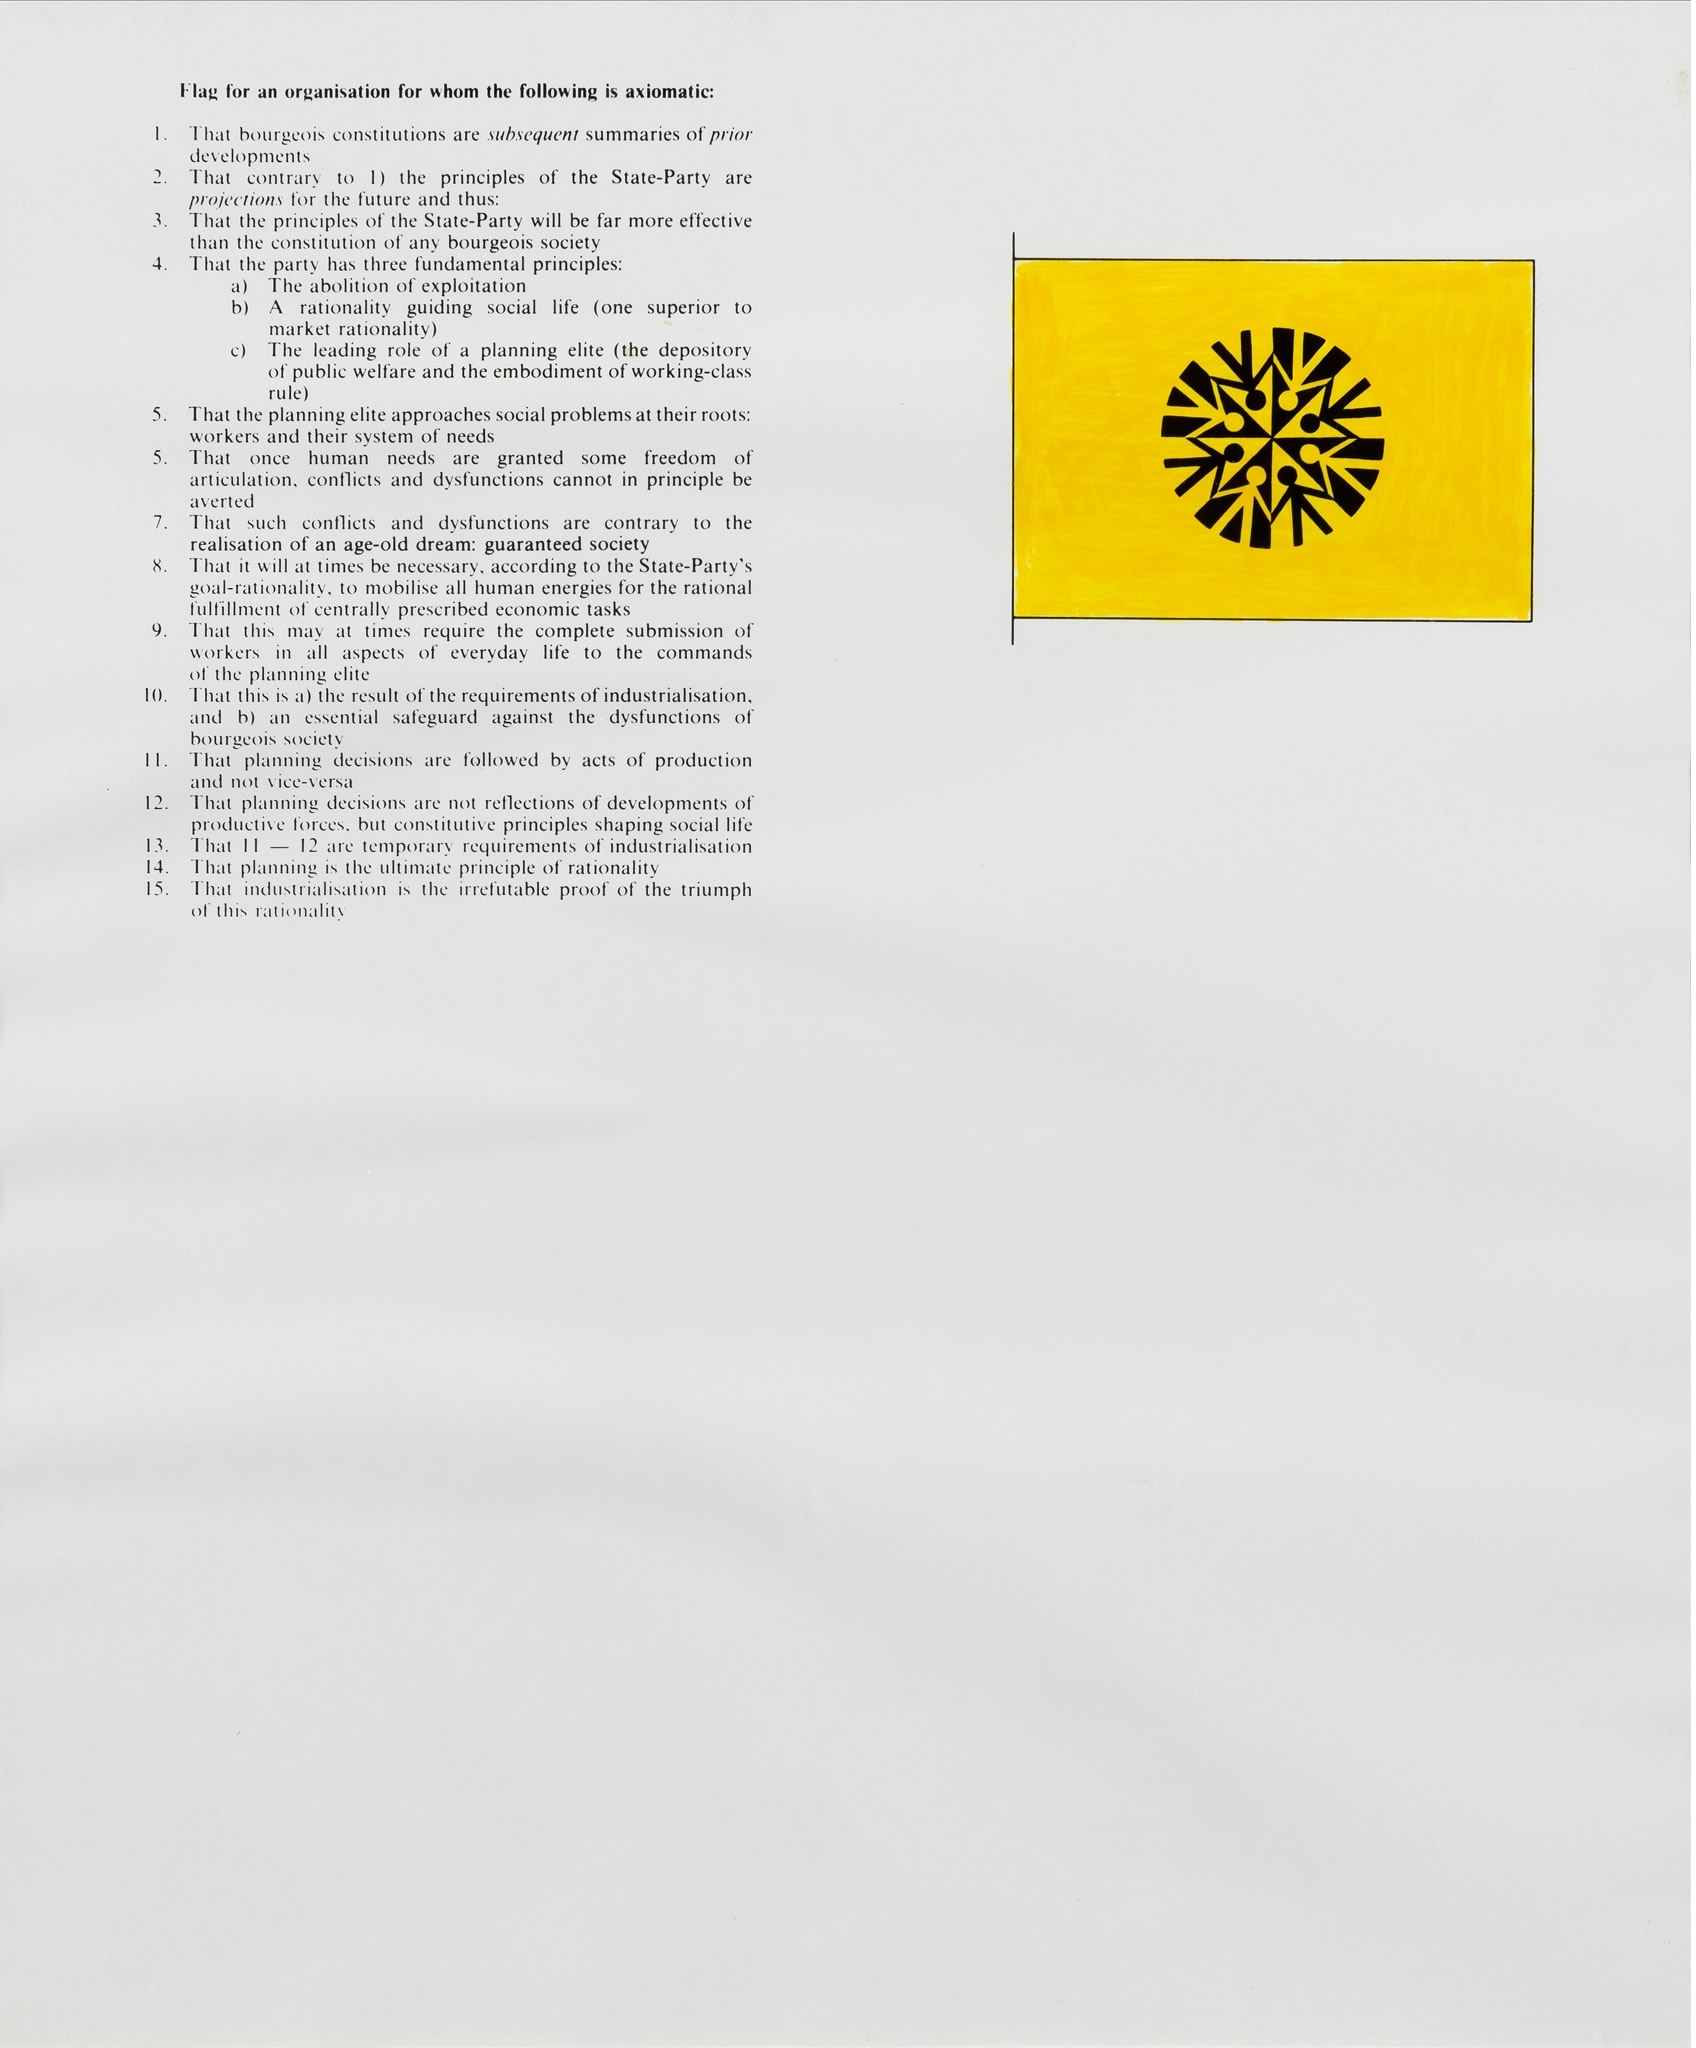 Art & Language: 4 Flags for Organisations (58.4 x 48 cm) 1978.